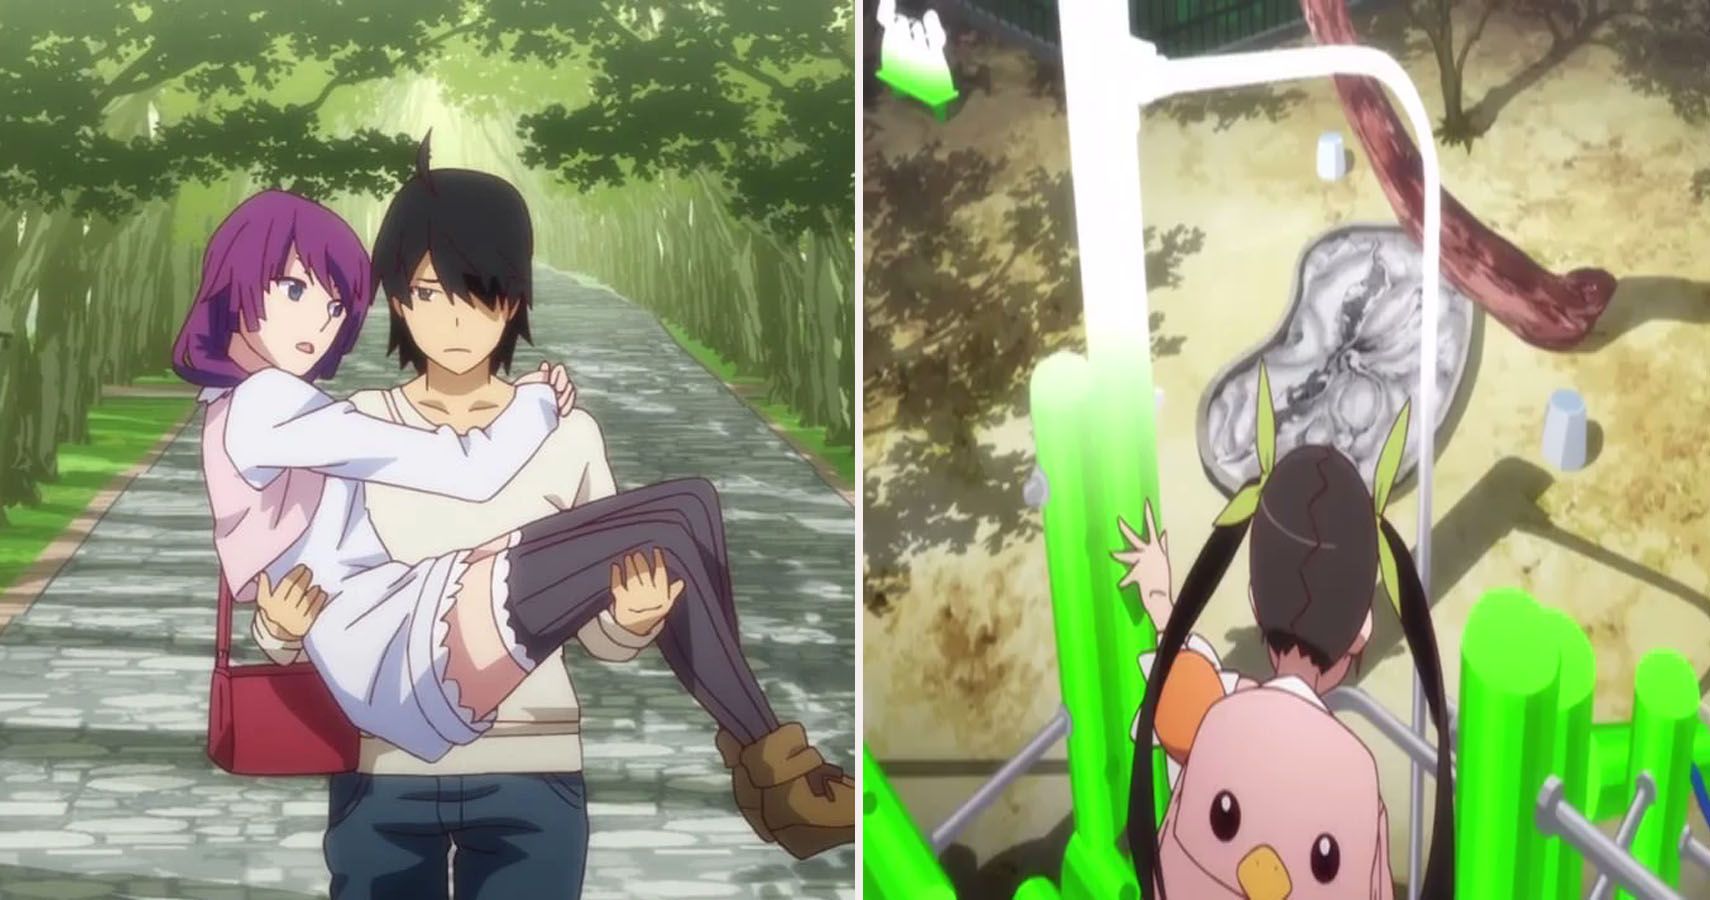 Anime with a similar way of storytelling to the Monogatari series